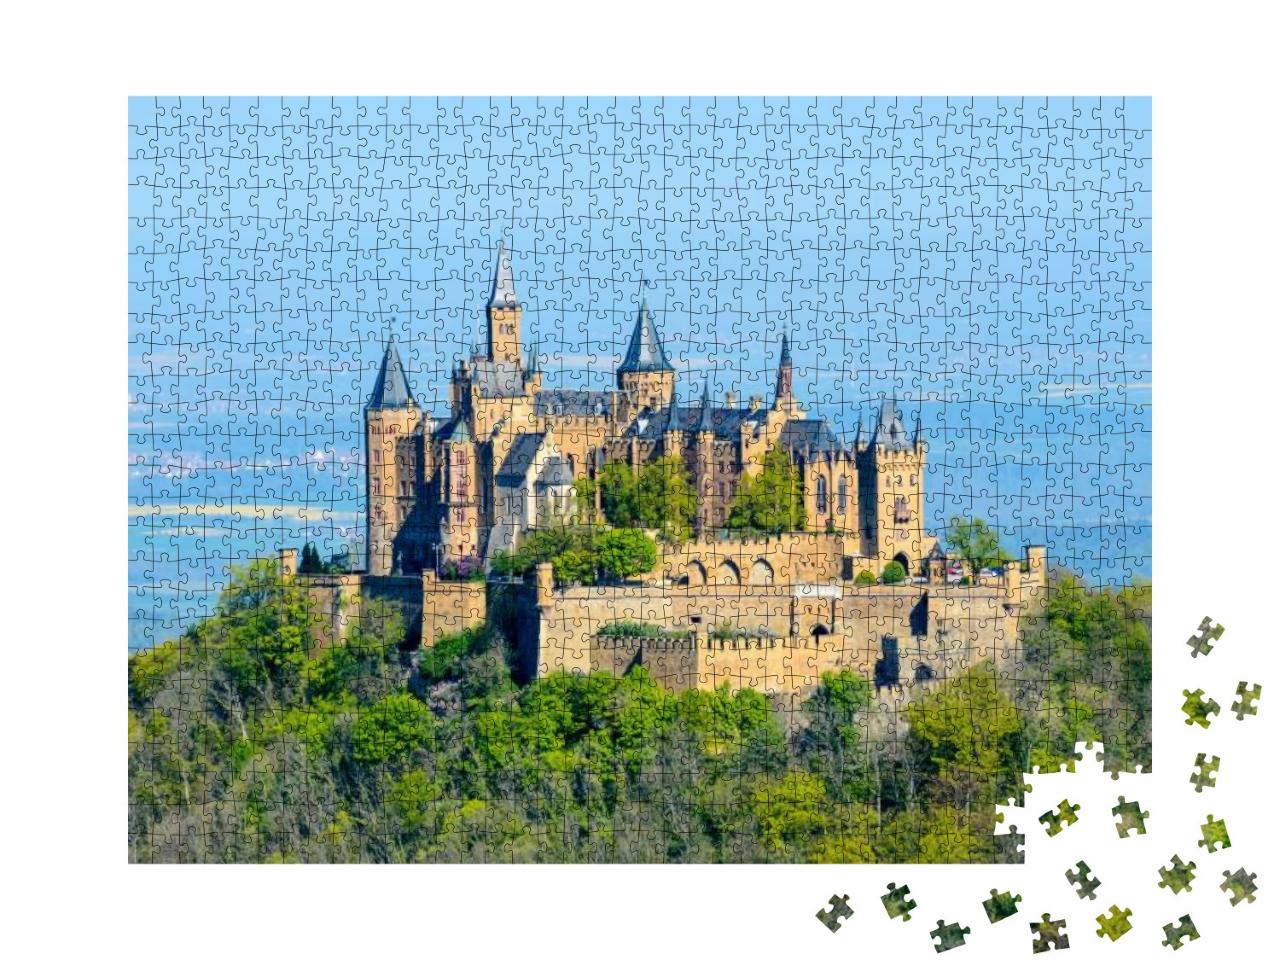 Castle Burg Hohenzollern by Hechingen, Near Stuttgart. Po... Jigsaw Puzzle with 1000 pieces